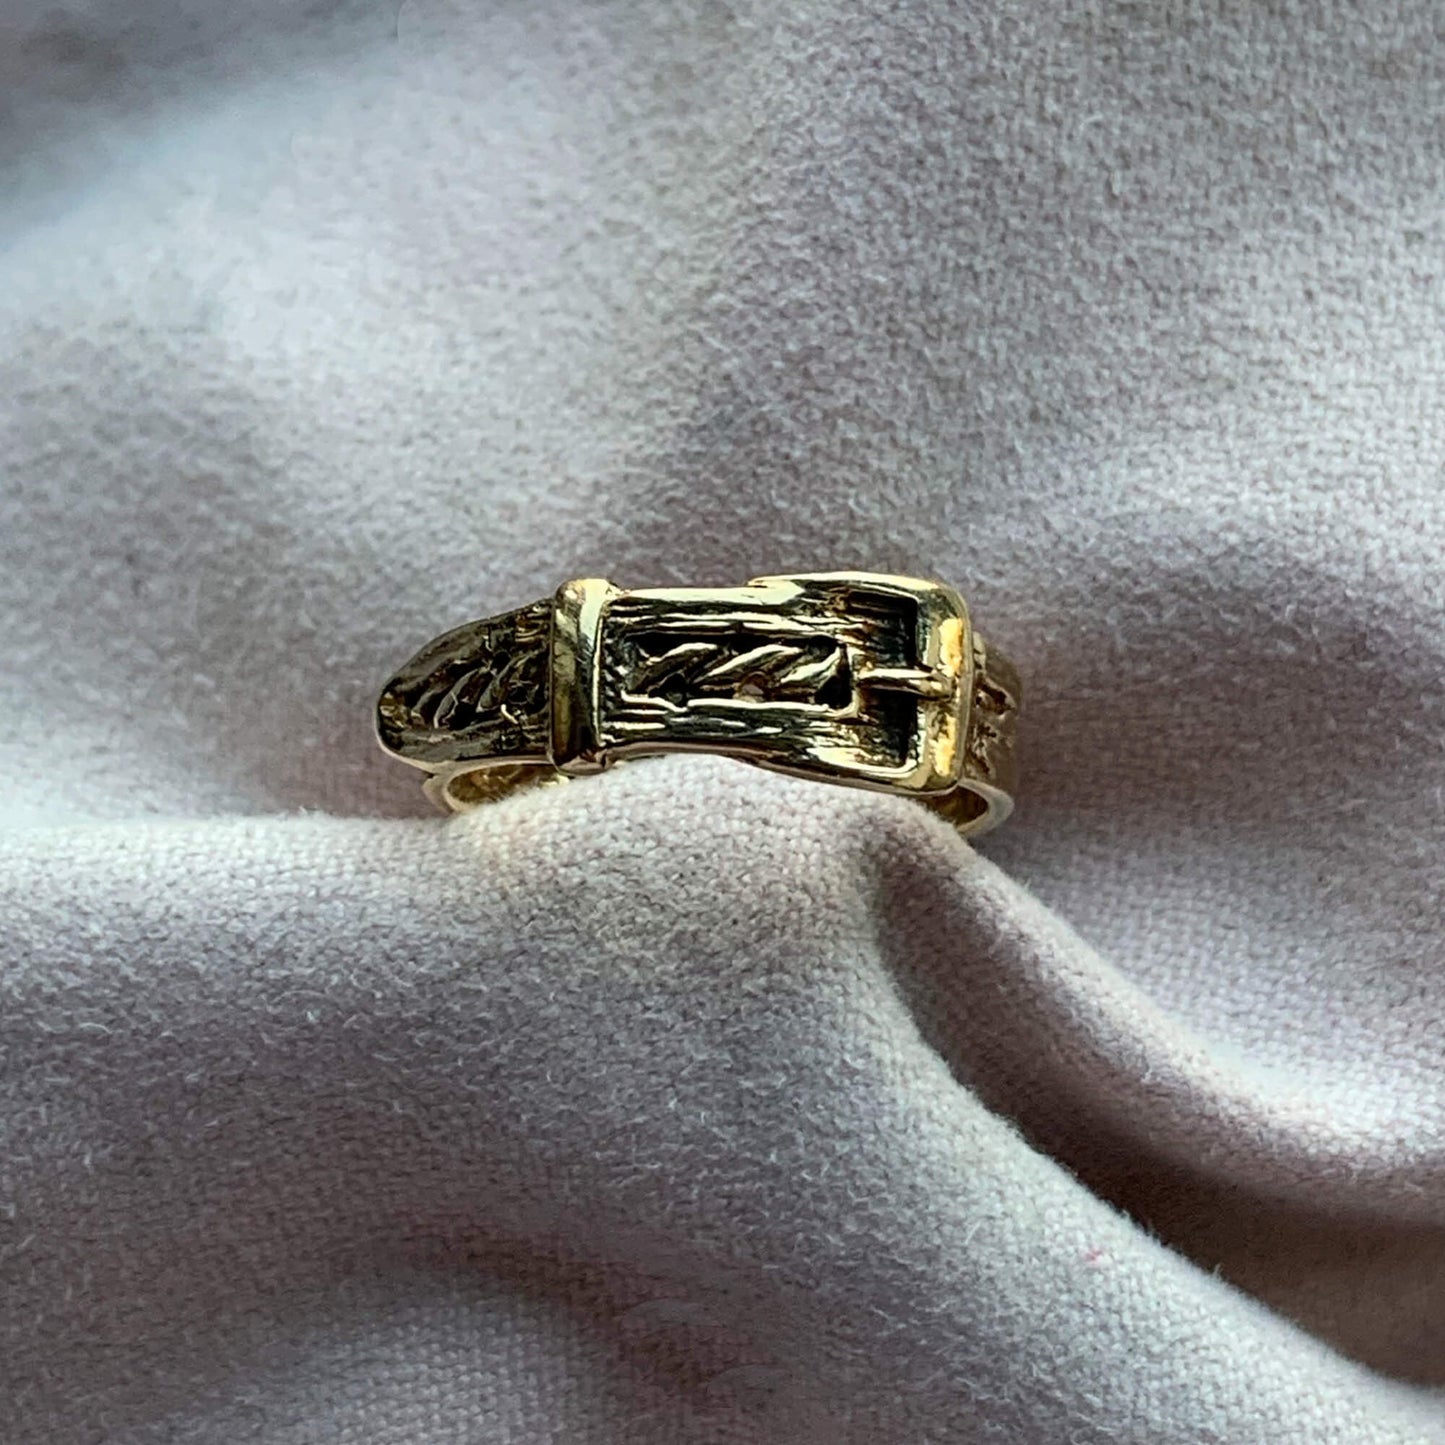 Vintage 9K gold buckle ring with braid detail, nestled in pink jewellery cloth.